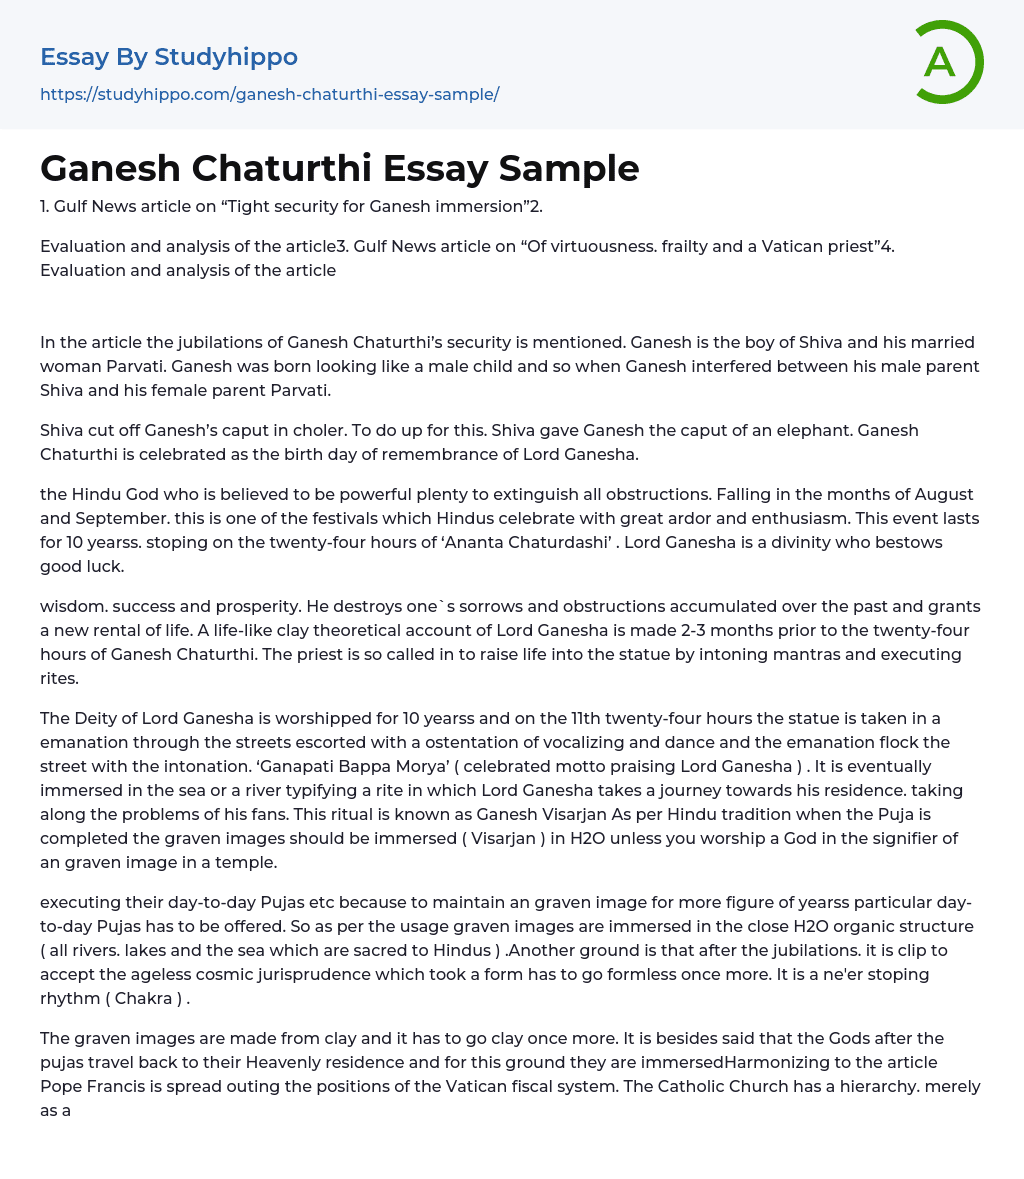 how to write an essay on ganesh chaturthi